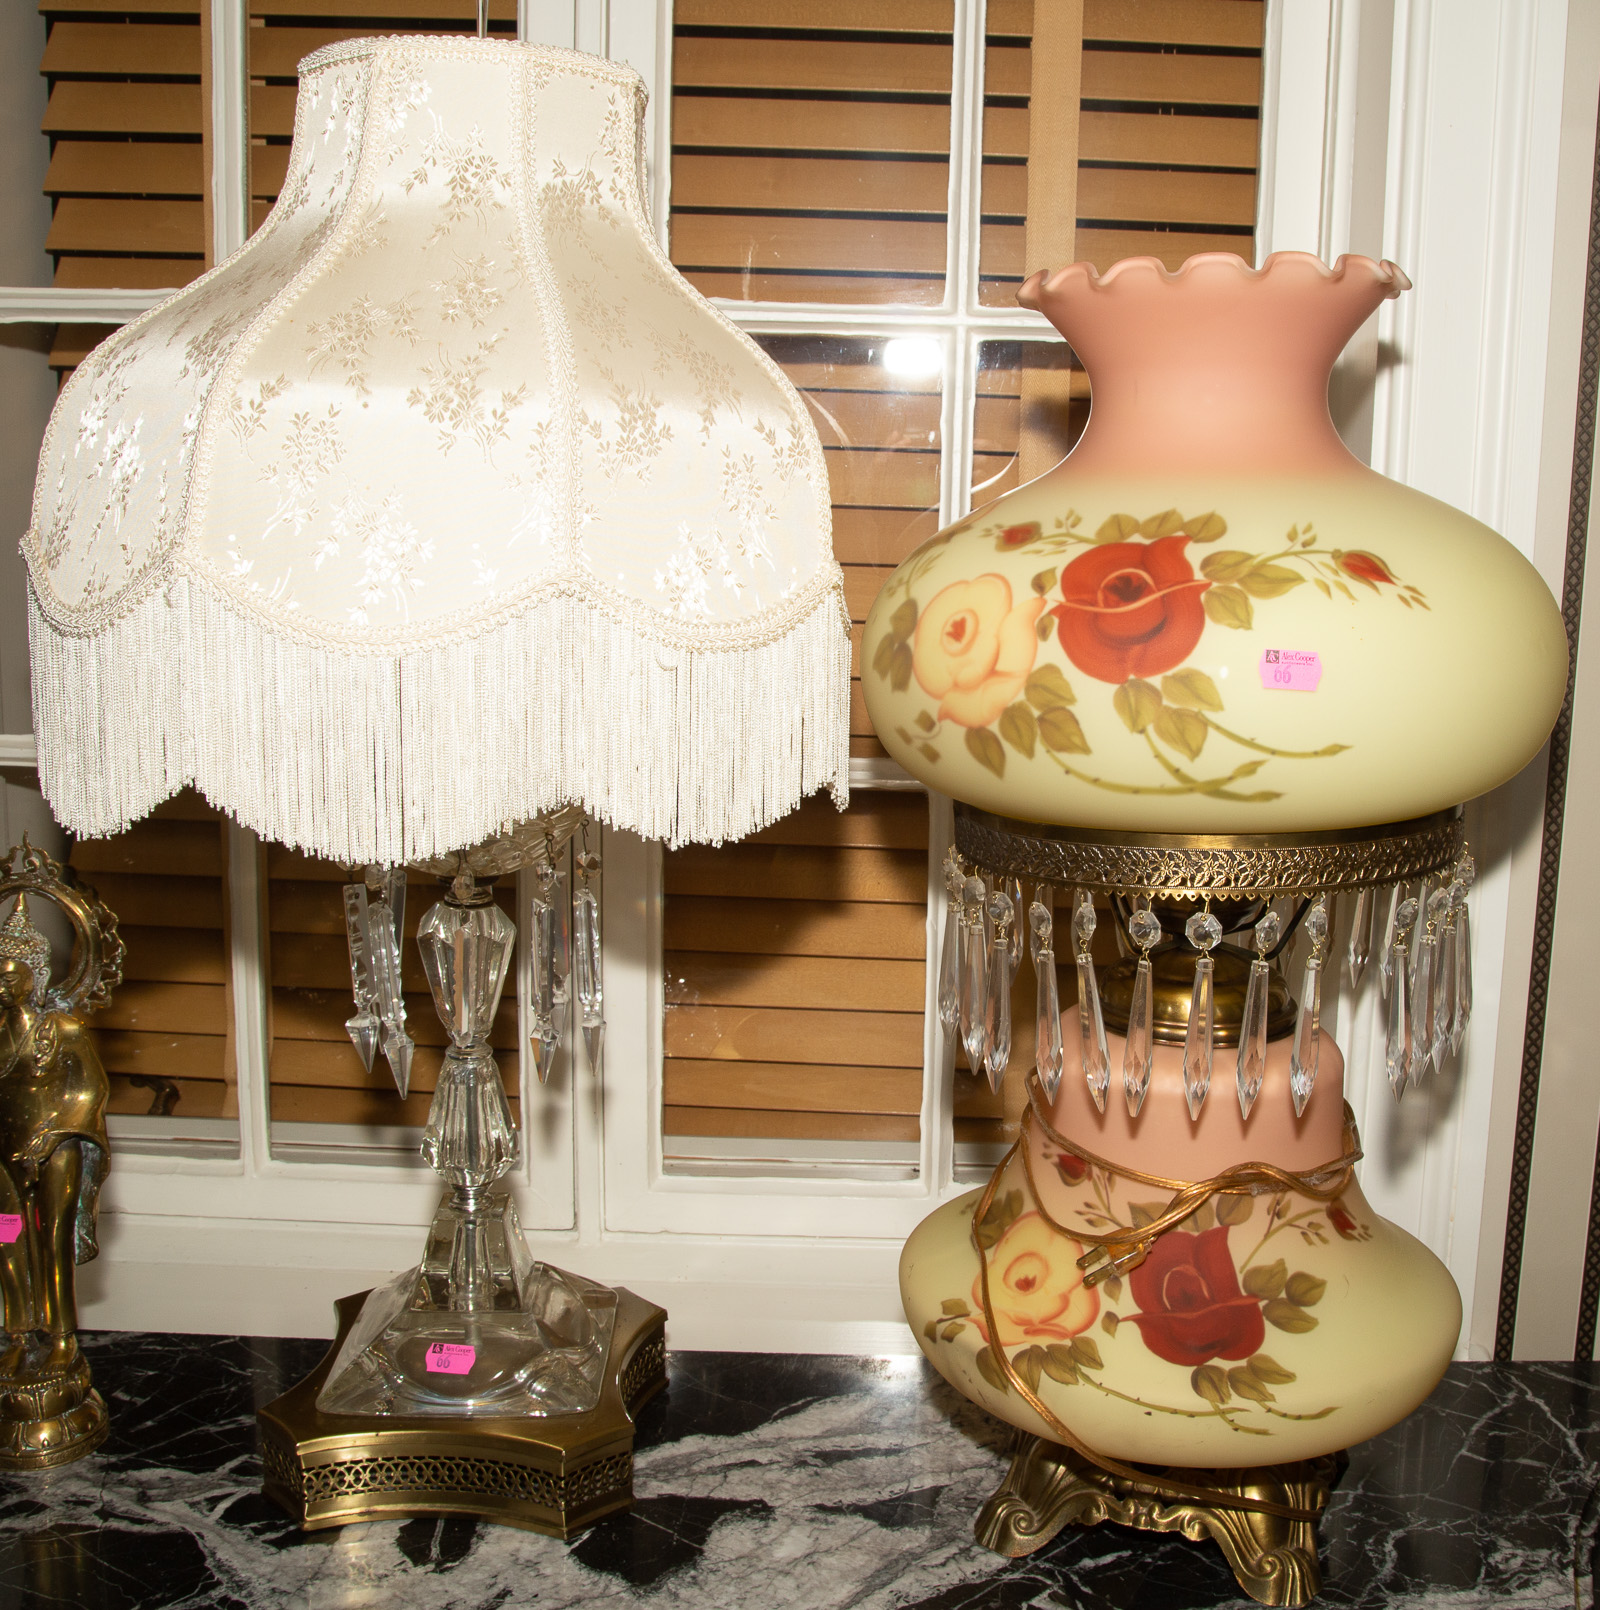 TWO VICTORIAN INSPIRED TABLE LAMPS 36a26a